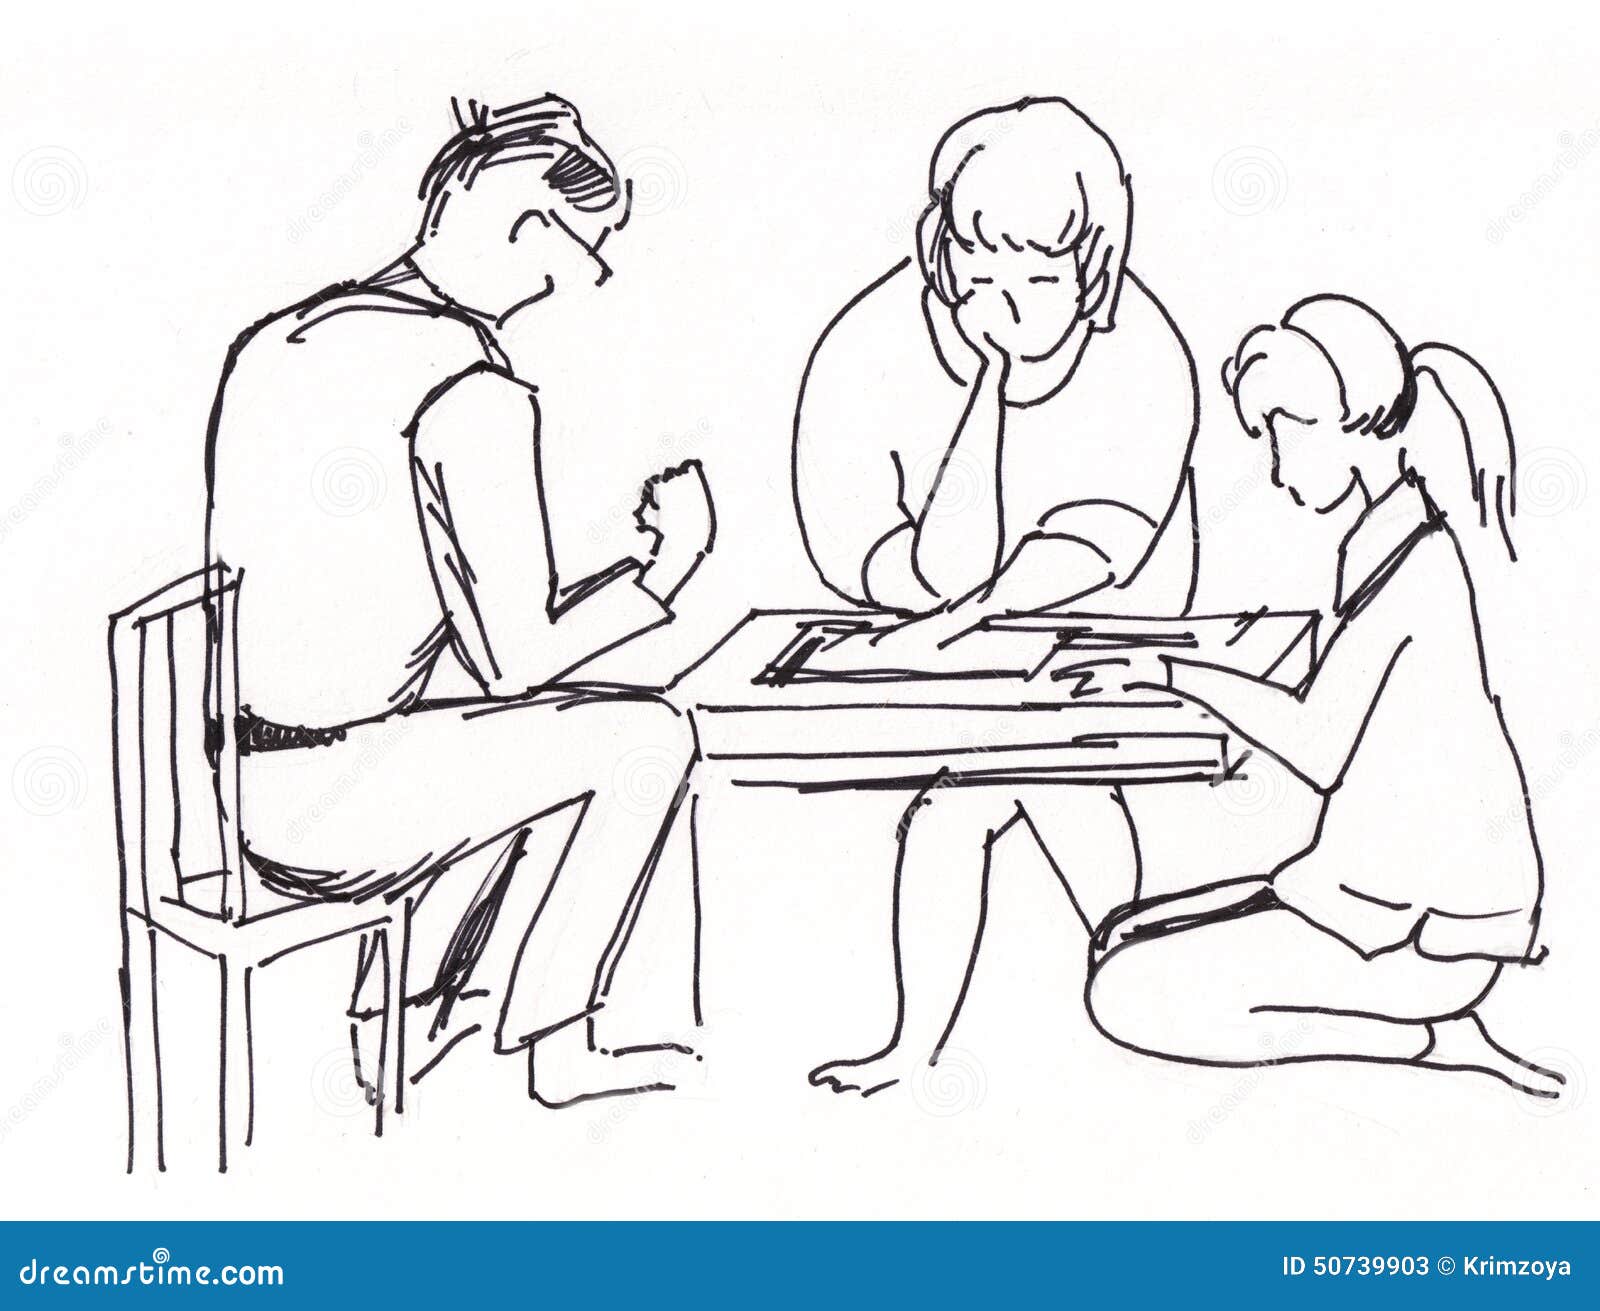 35+ Ideas For Sketch Family Playing Games Together Drawing